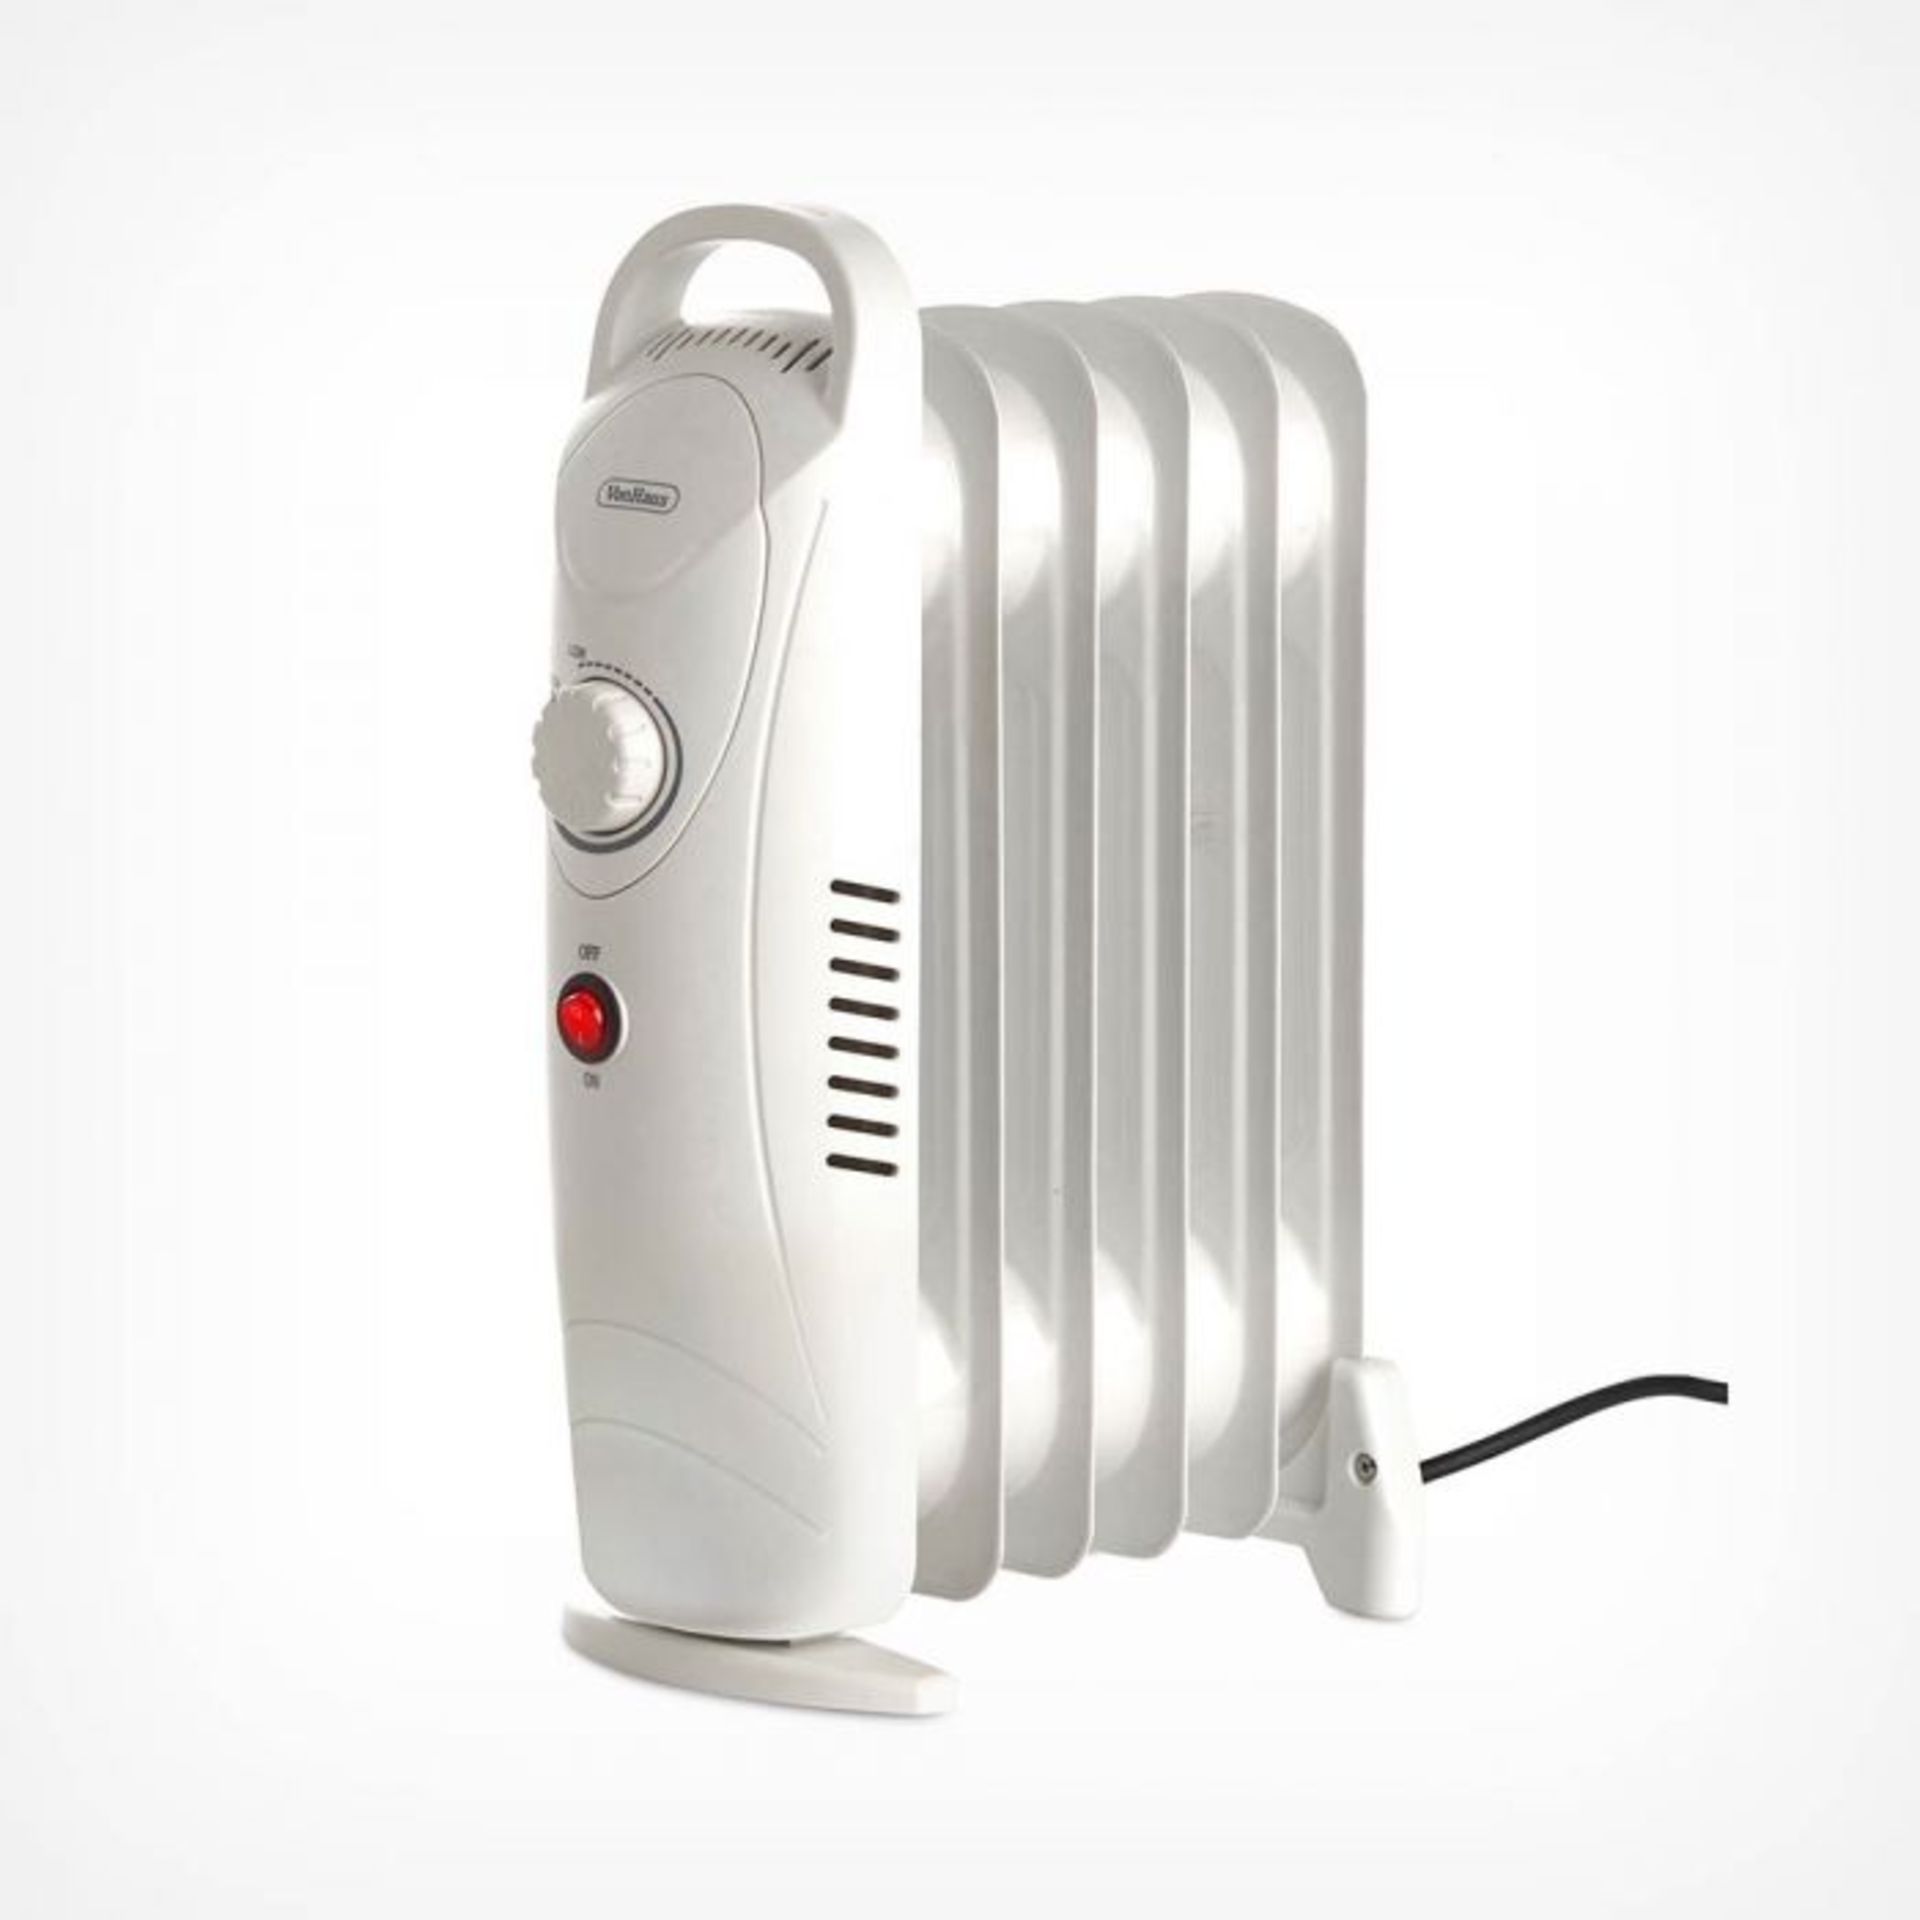 (NN20) 6 Fin 800W Oil Filled Radiator - White Compact yet powerful 800W radiator with 6 oil-fi... - Image 2 of 3